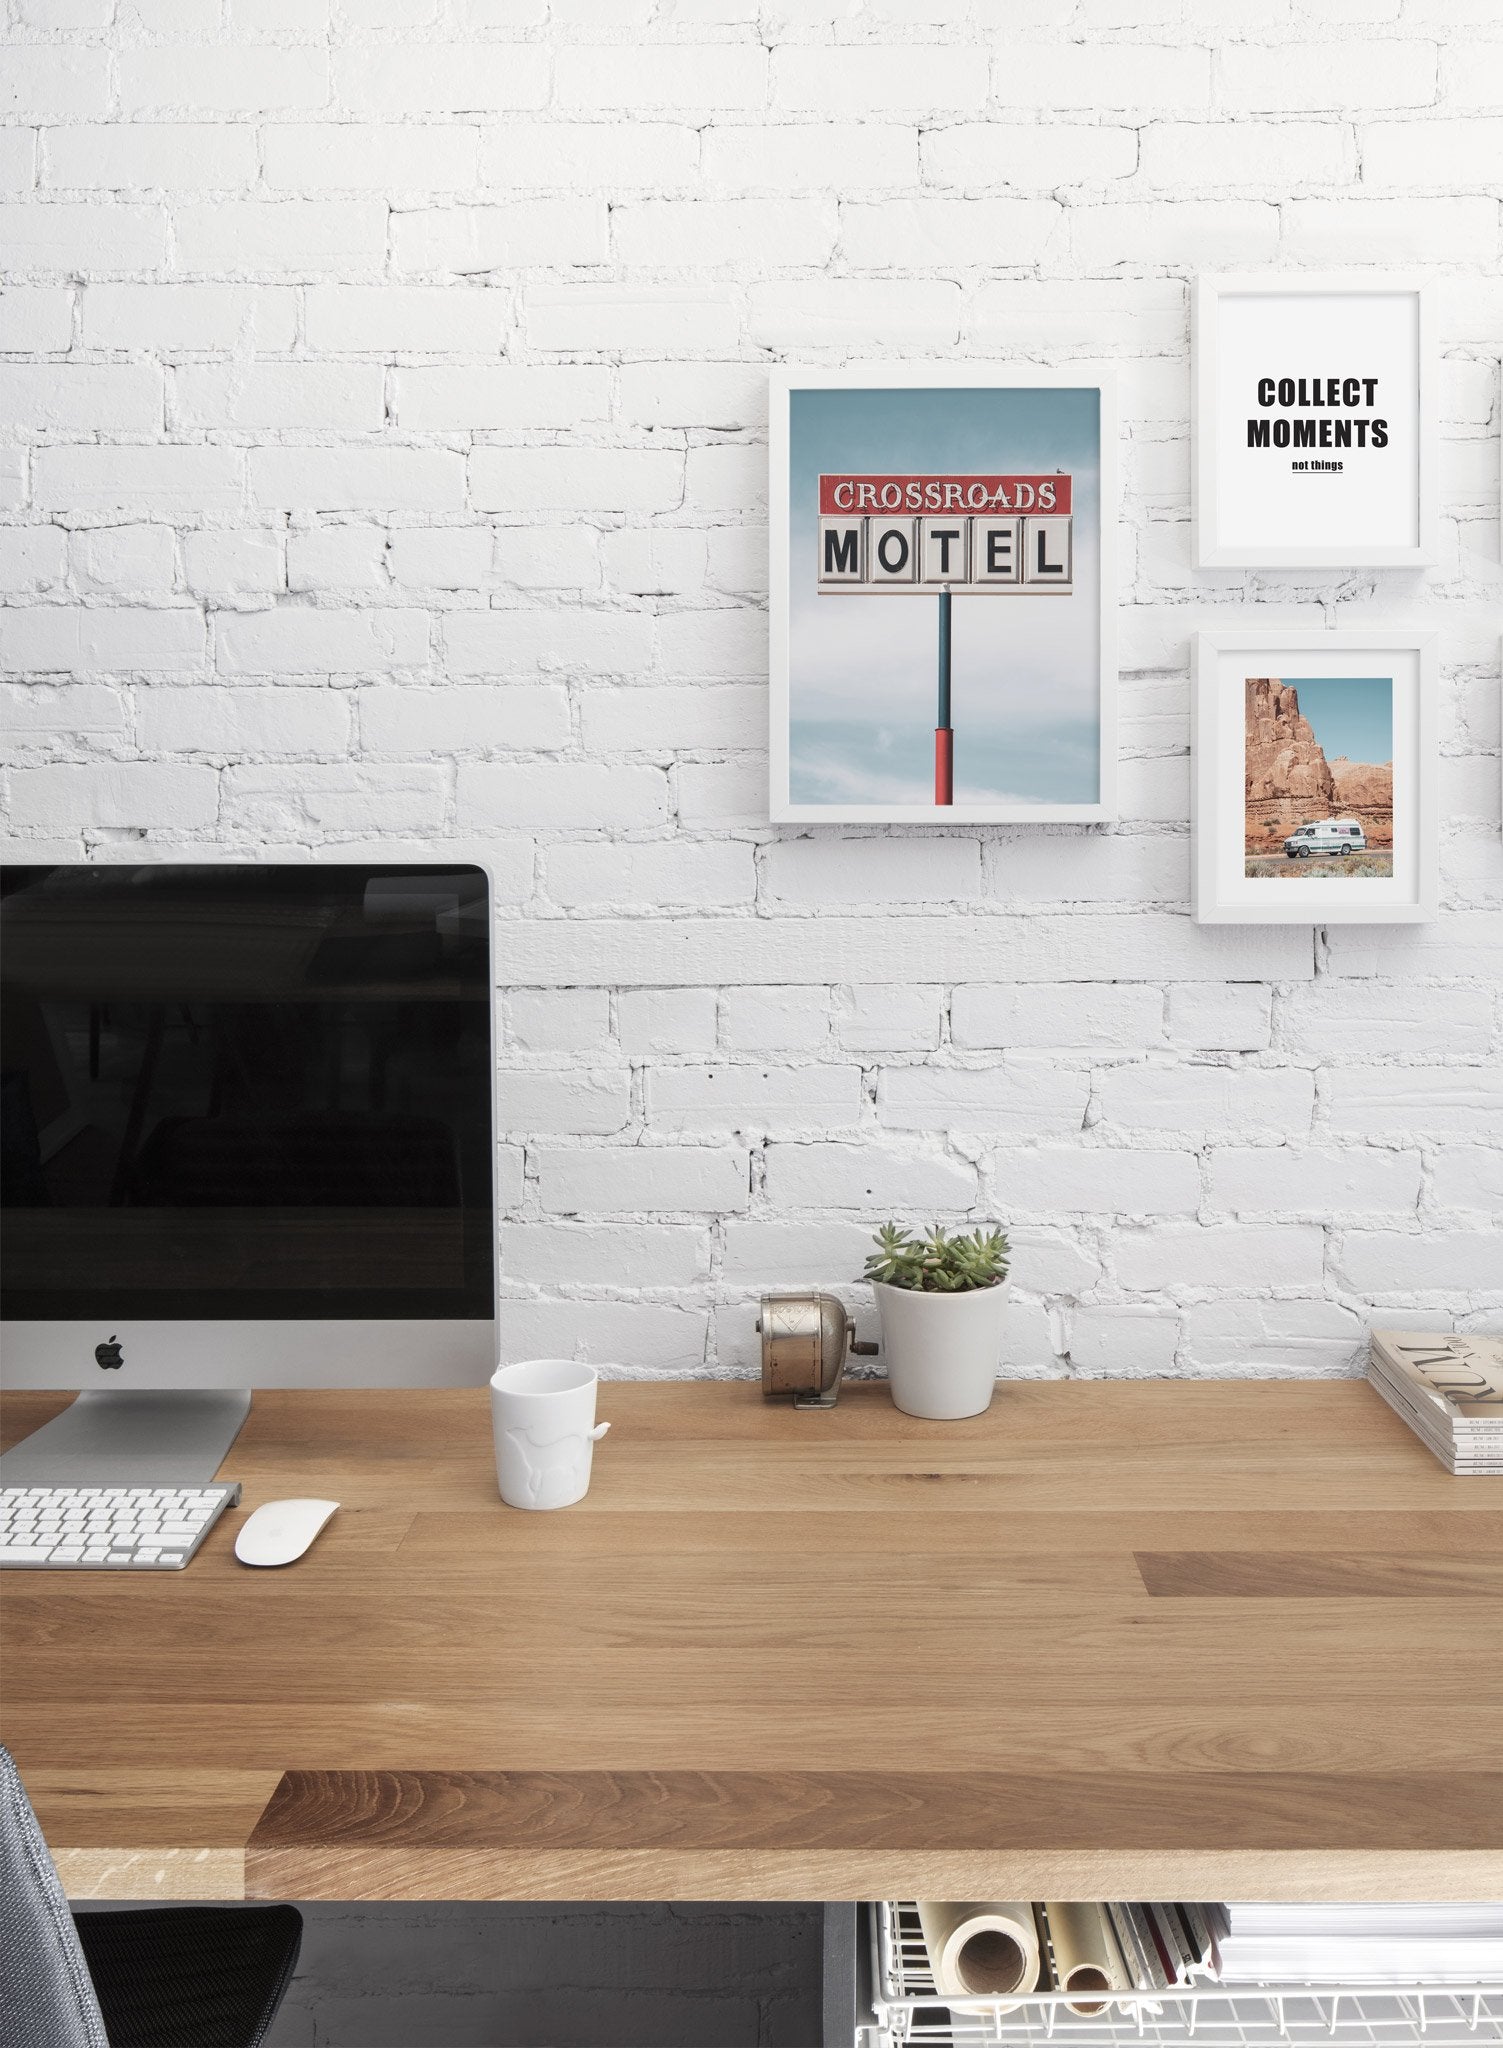 Crossroads modern minimalist photography poster by Opposite Wall - Personal office